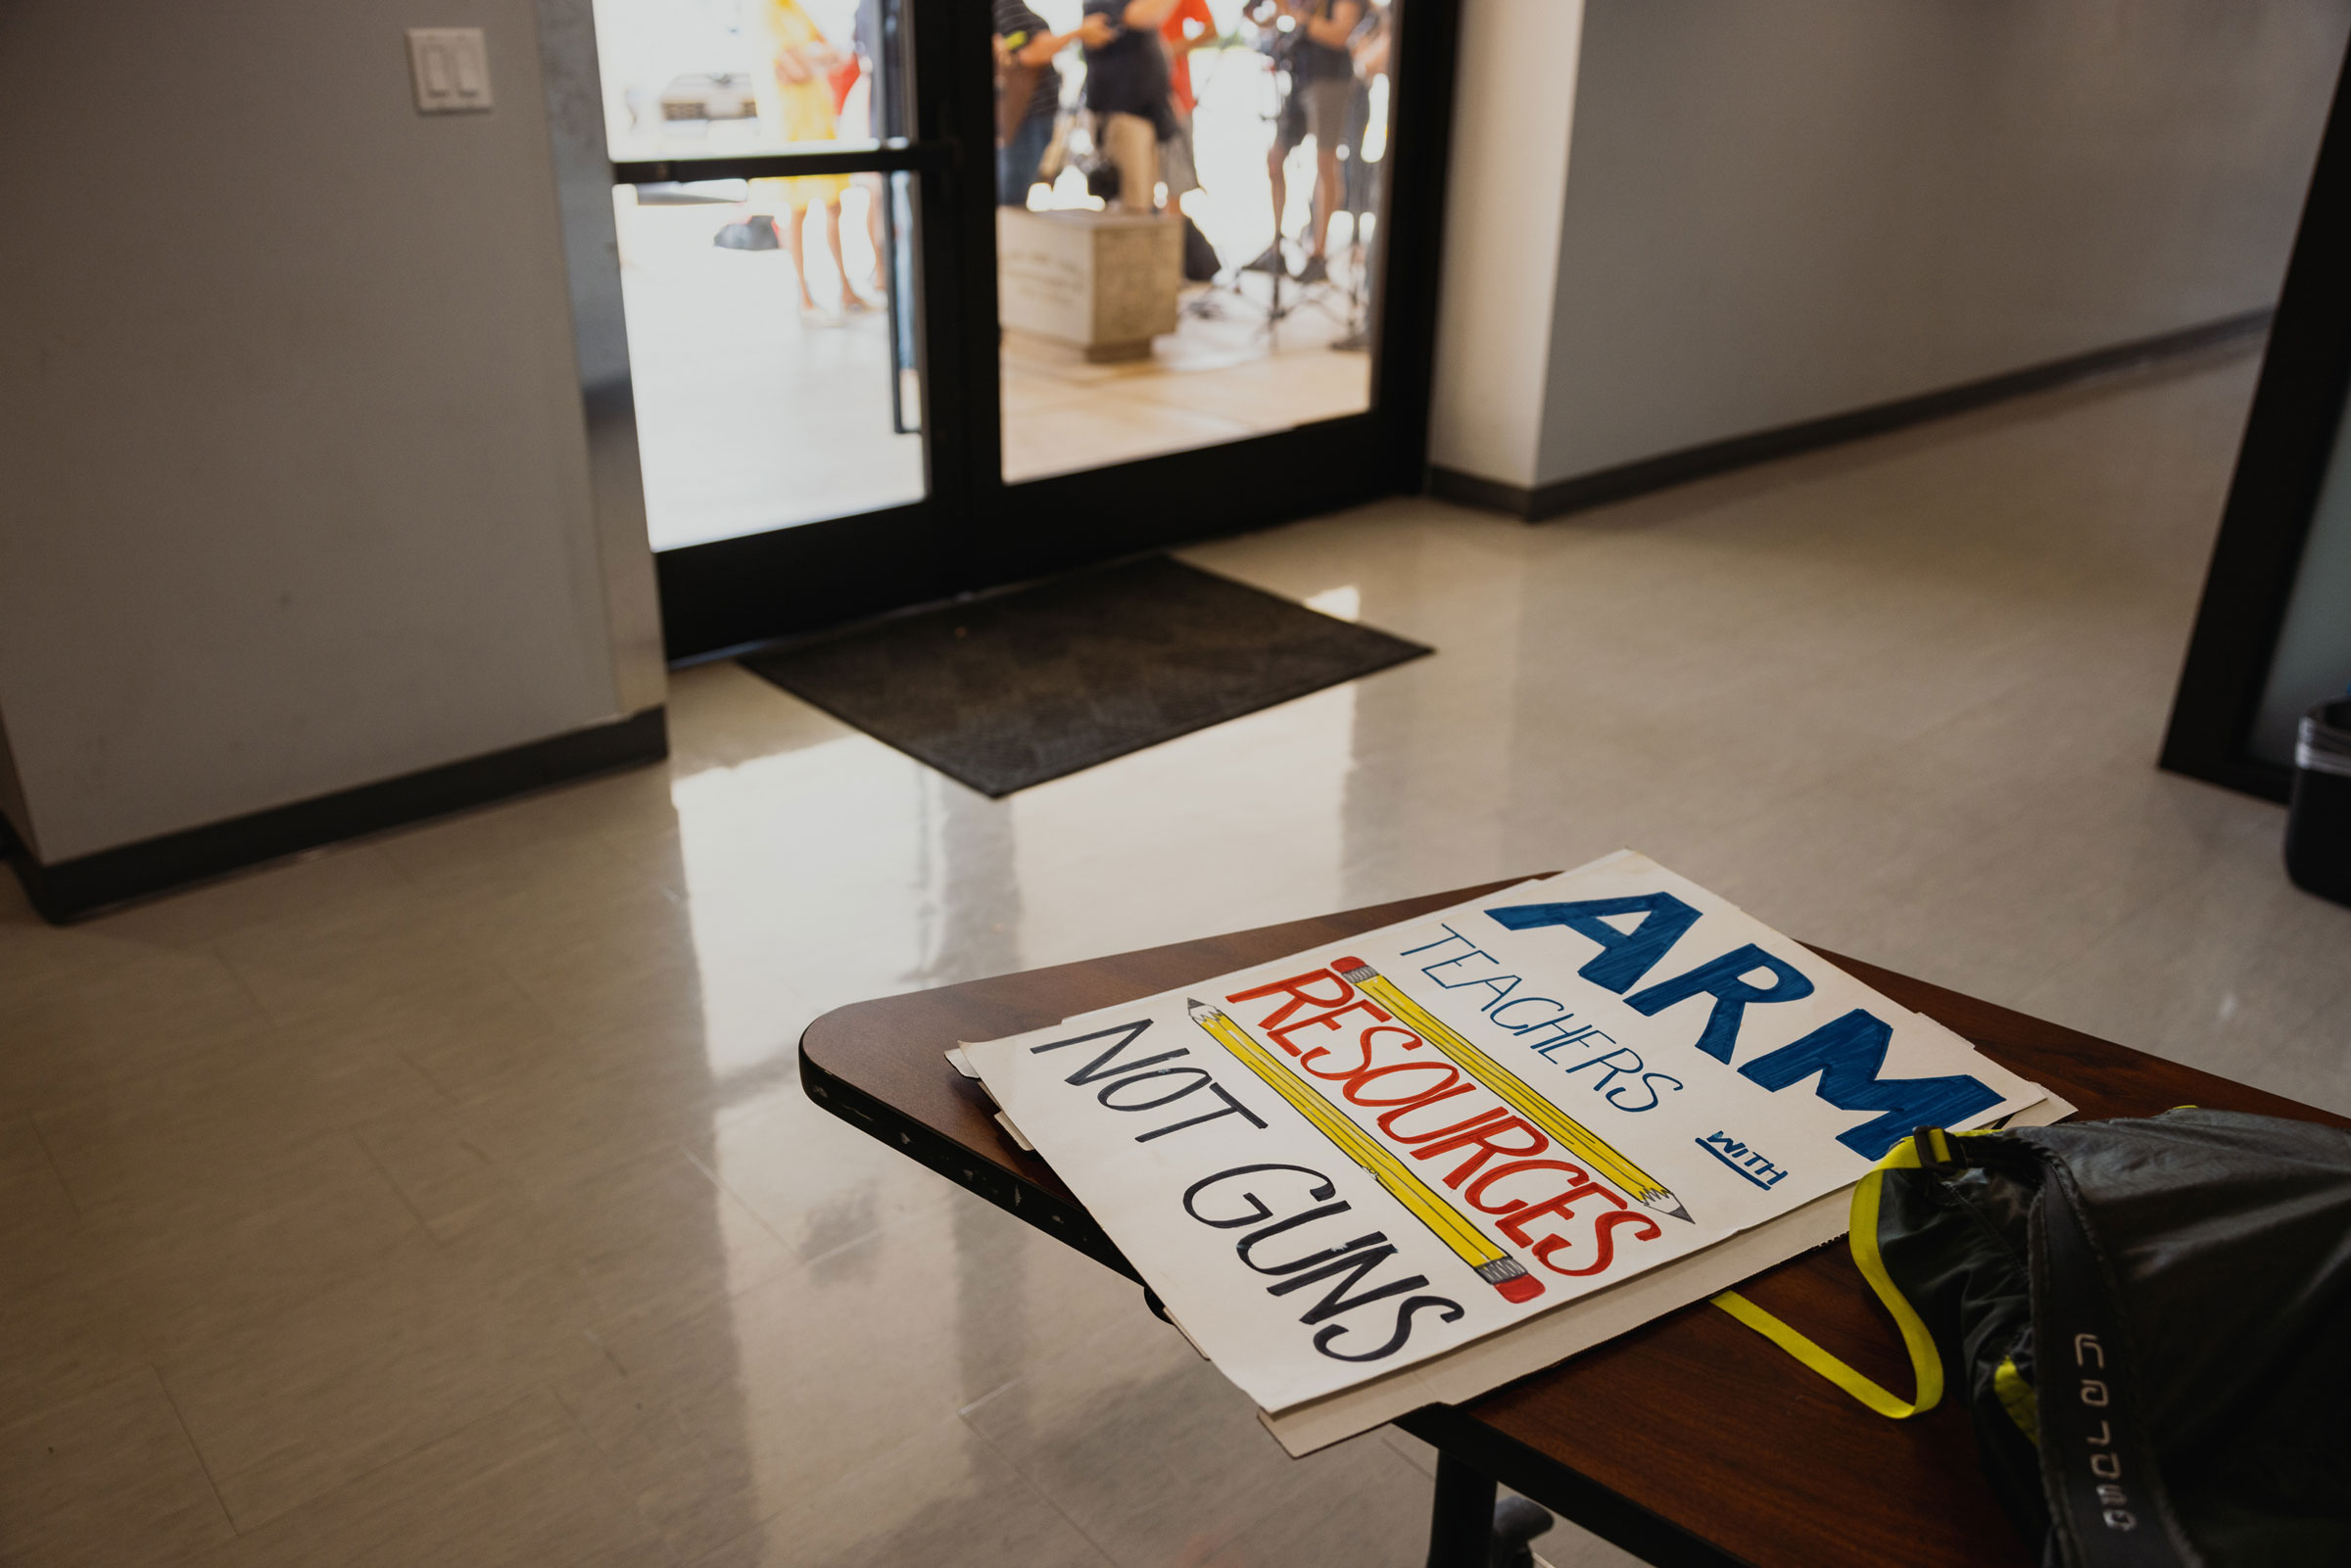 A sign at the AFLCIO office before demonstrators with the Texas American Federation of Teachers prepare to march towards Senator Ted Cruz's office during a 'Take Action: Stop Gun Violence' rally in Austin, Texas, US, on Tuesday, May 31, 2022. (Jordan Vonderhaar—Bloomberg/Getty Images)